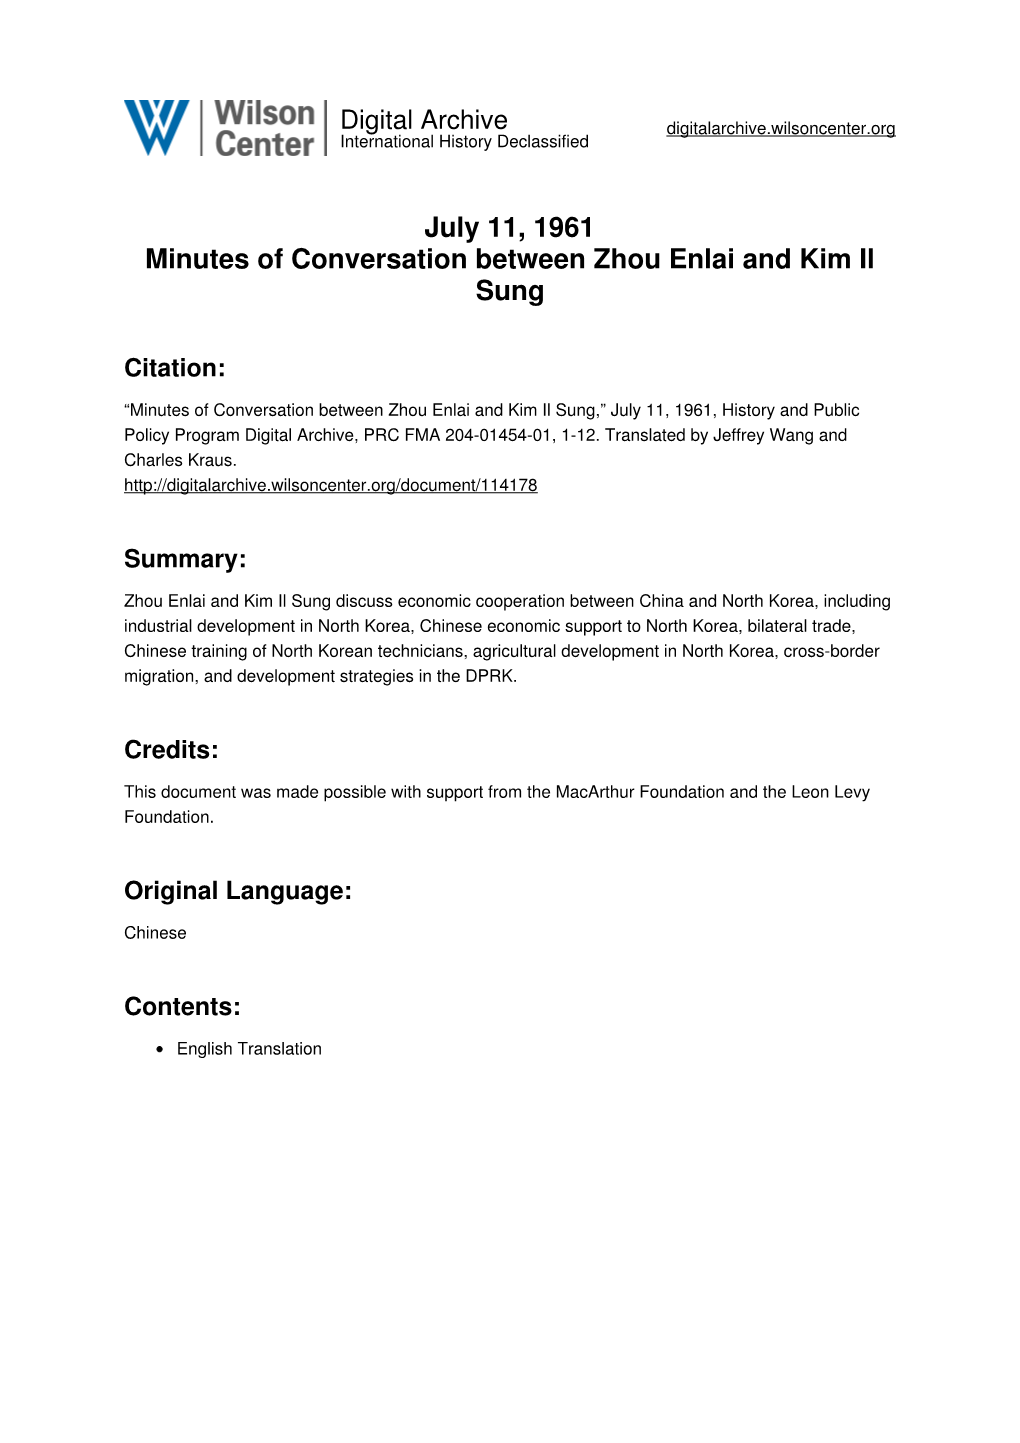 July 11, 1961 Minutes of Conversation Between Zhou Enlai and Kim Il Sung